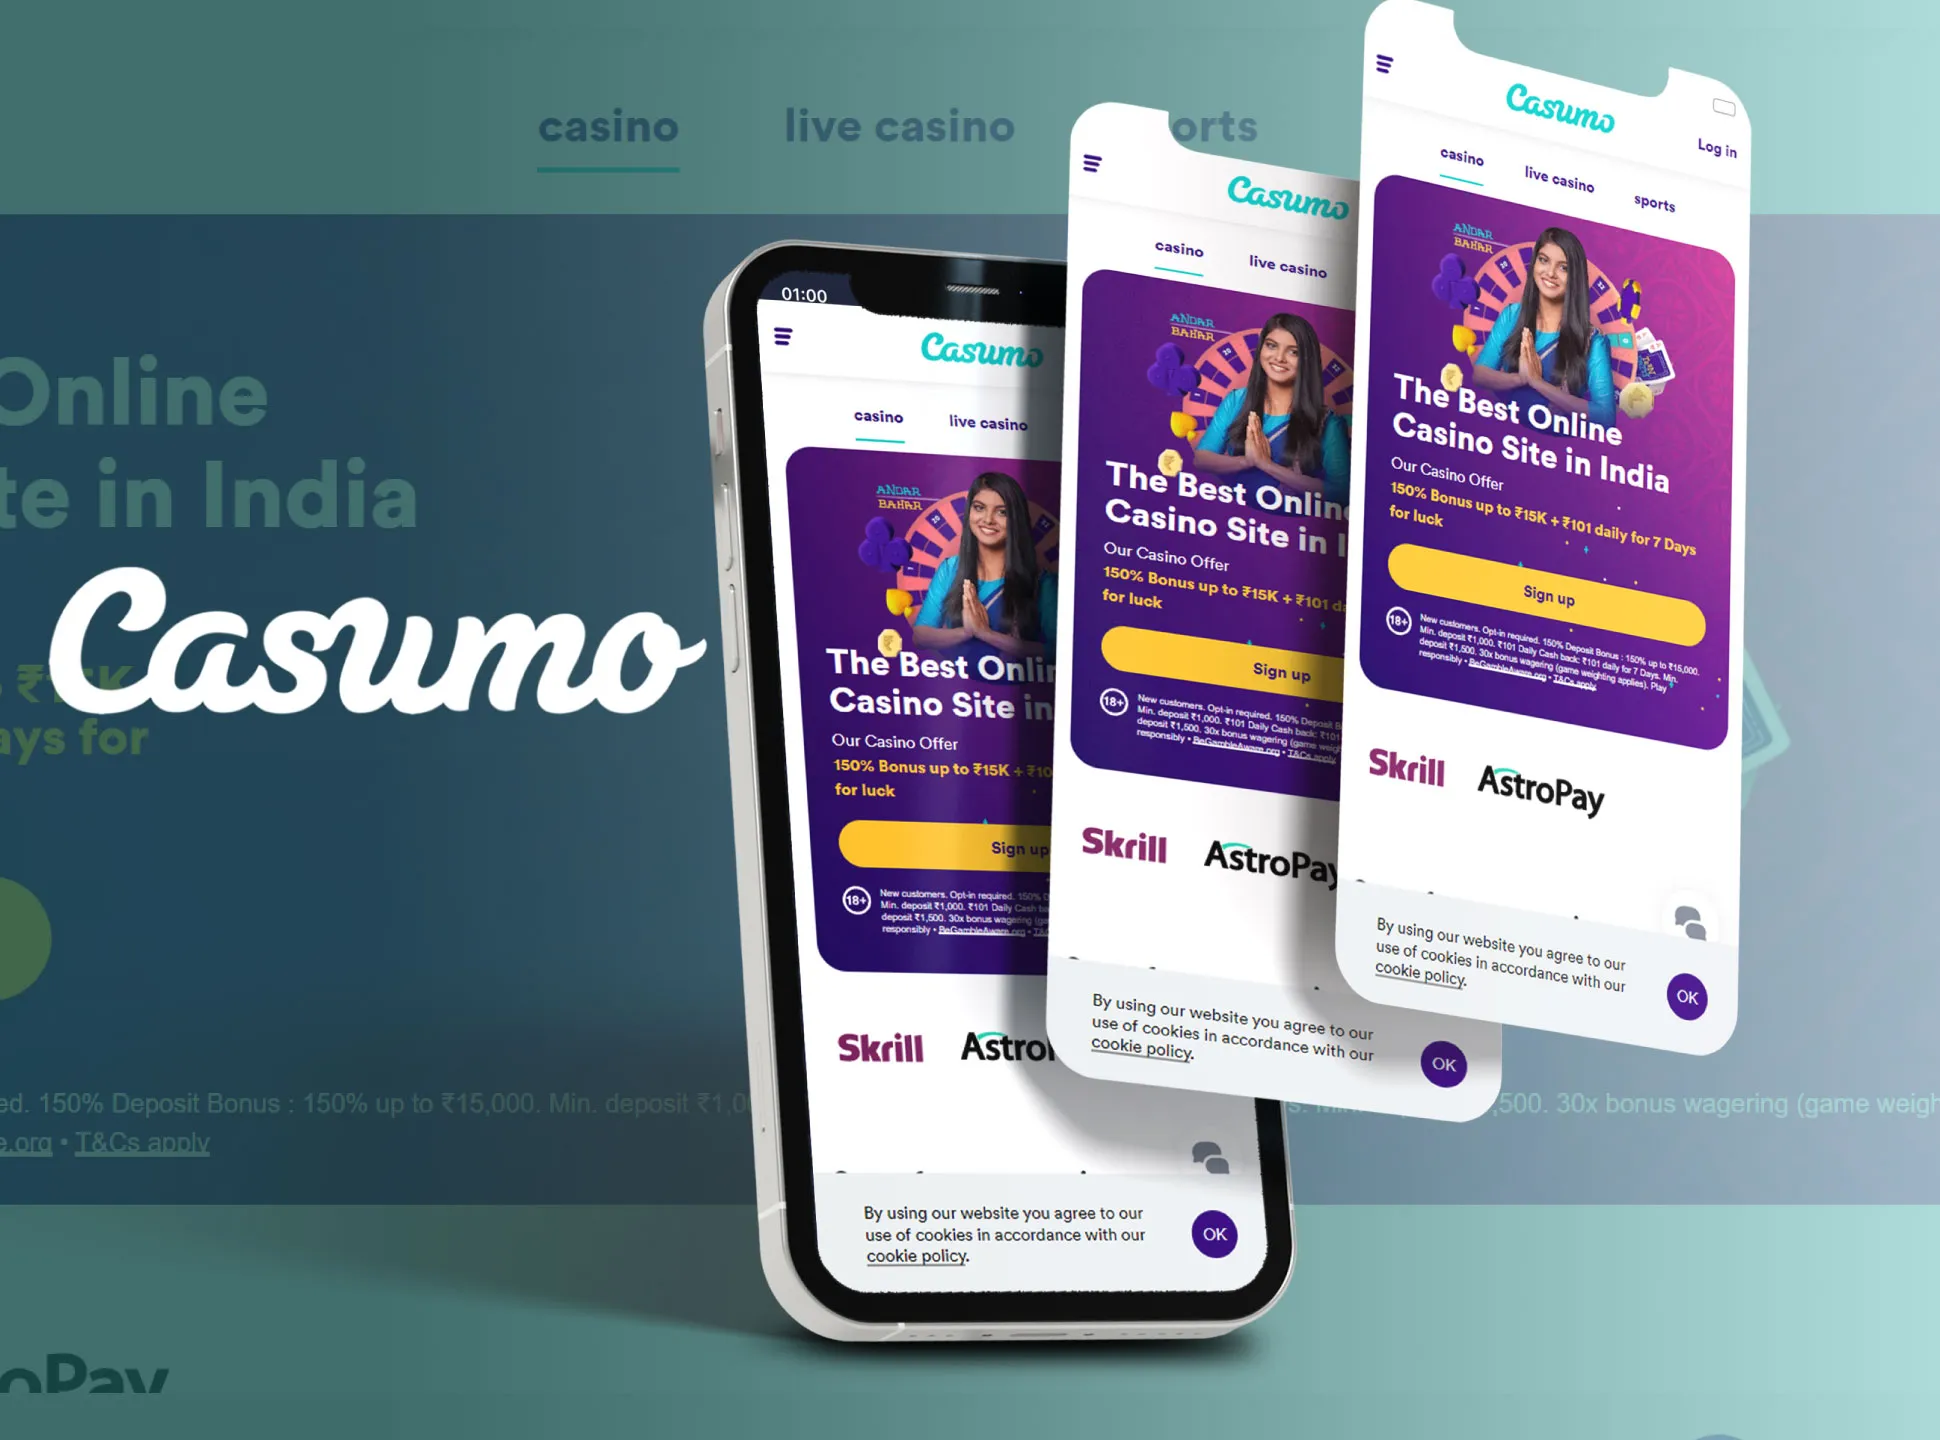 You can download the Casumo mobile app on any modern iPhone.